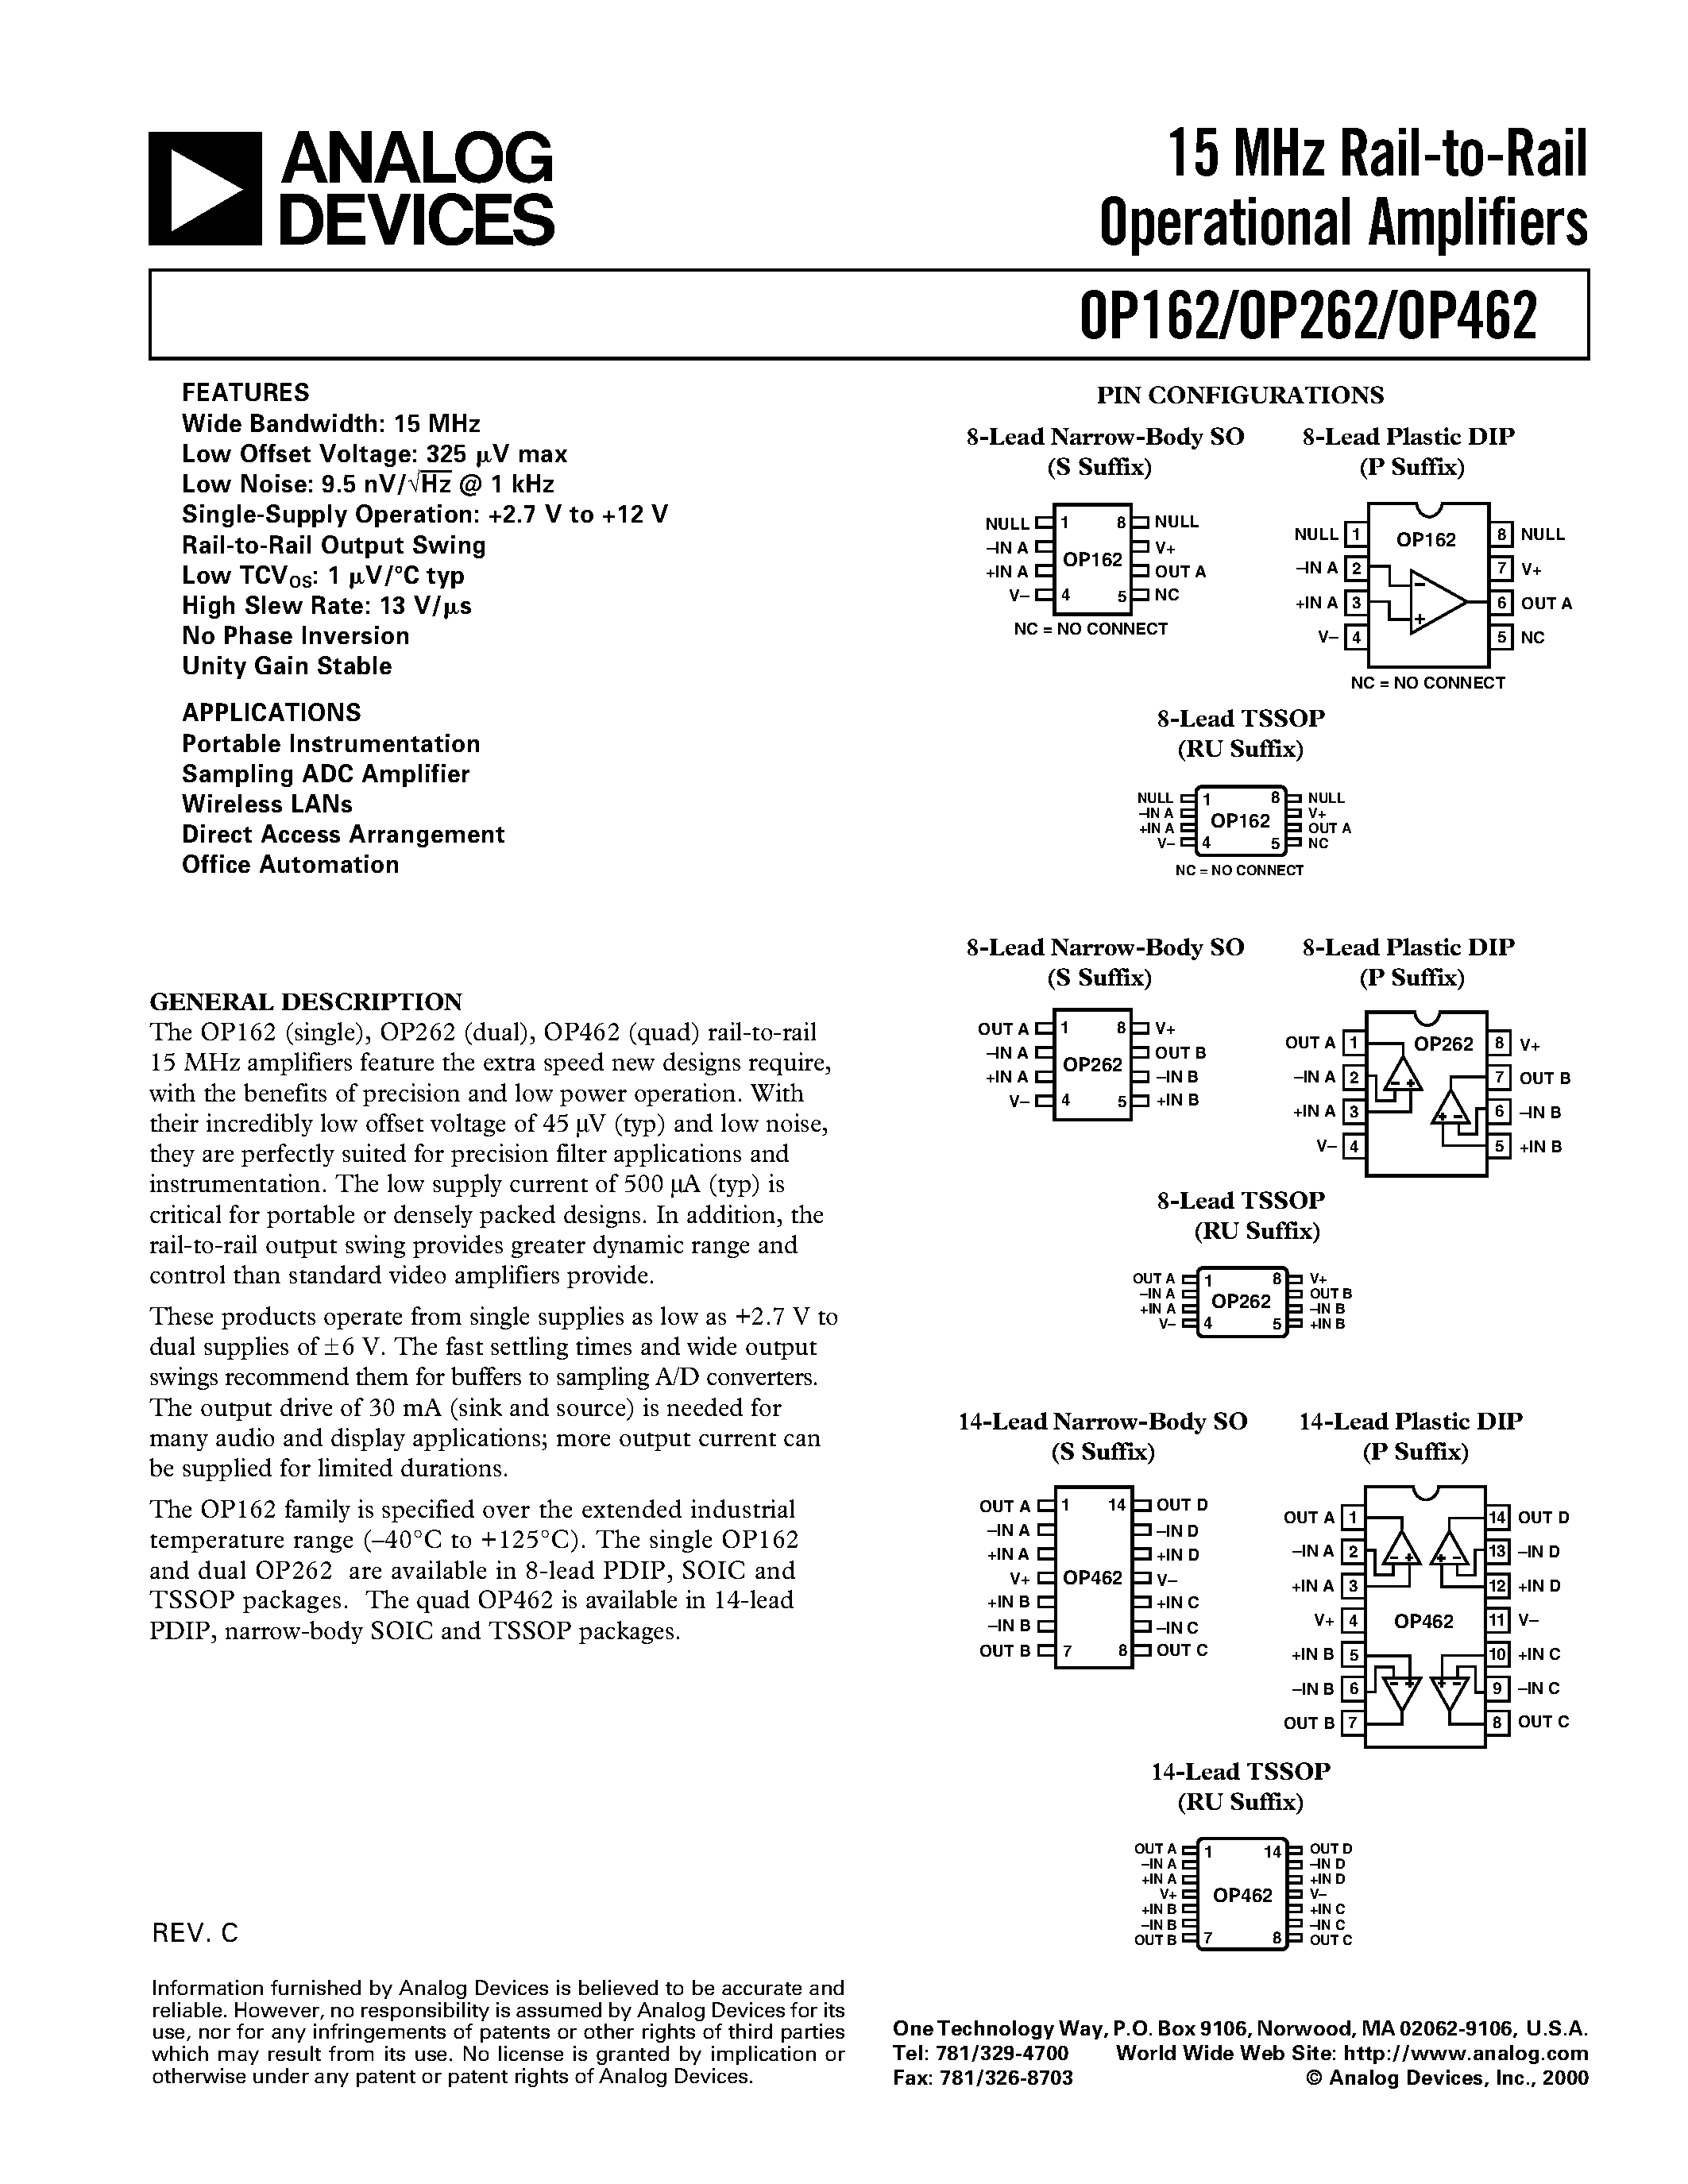 Datasheet OP262 - 15 MHz Rail-to-Rail Operational Amplifiers page 1